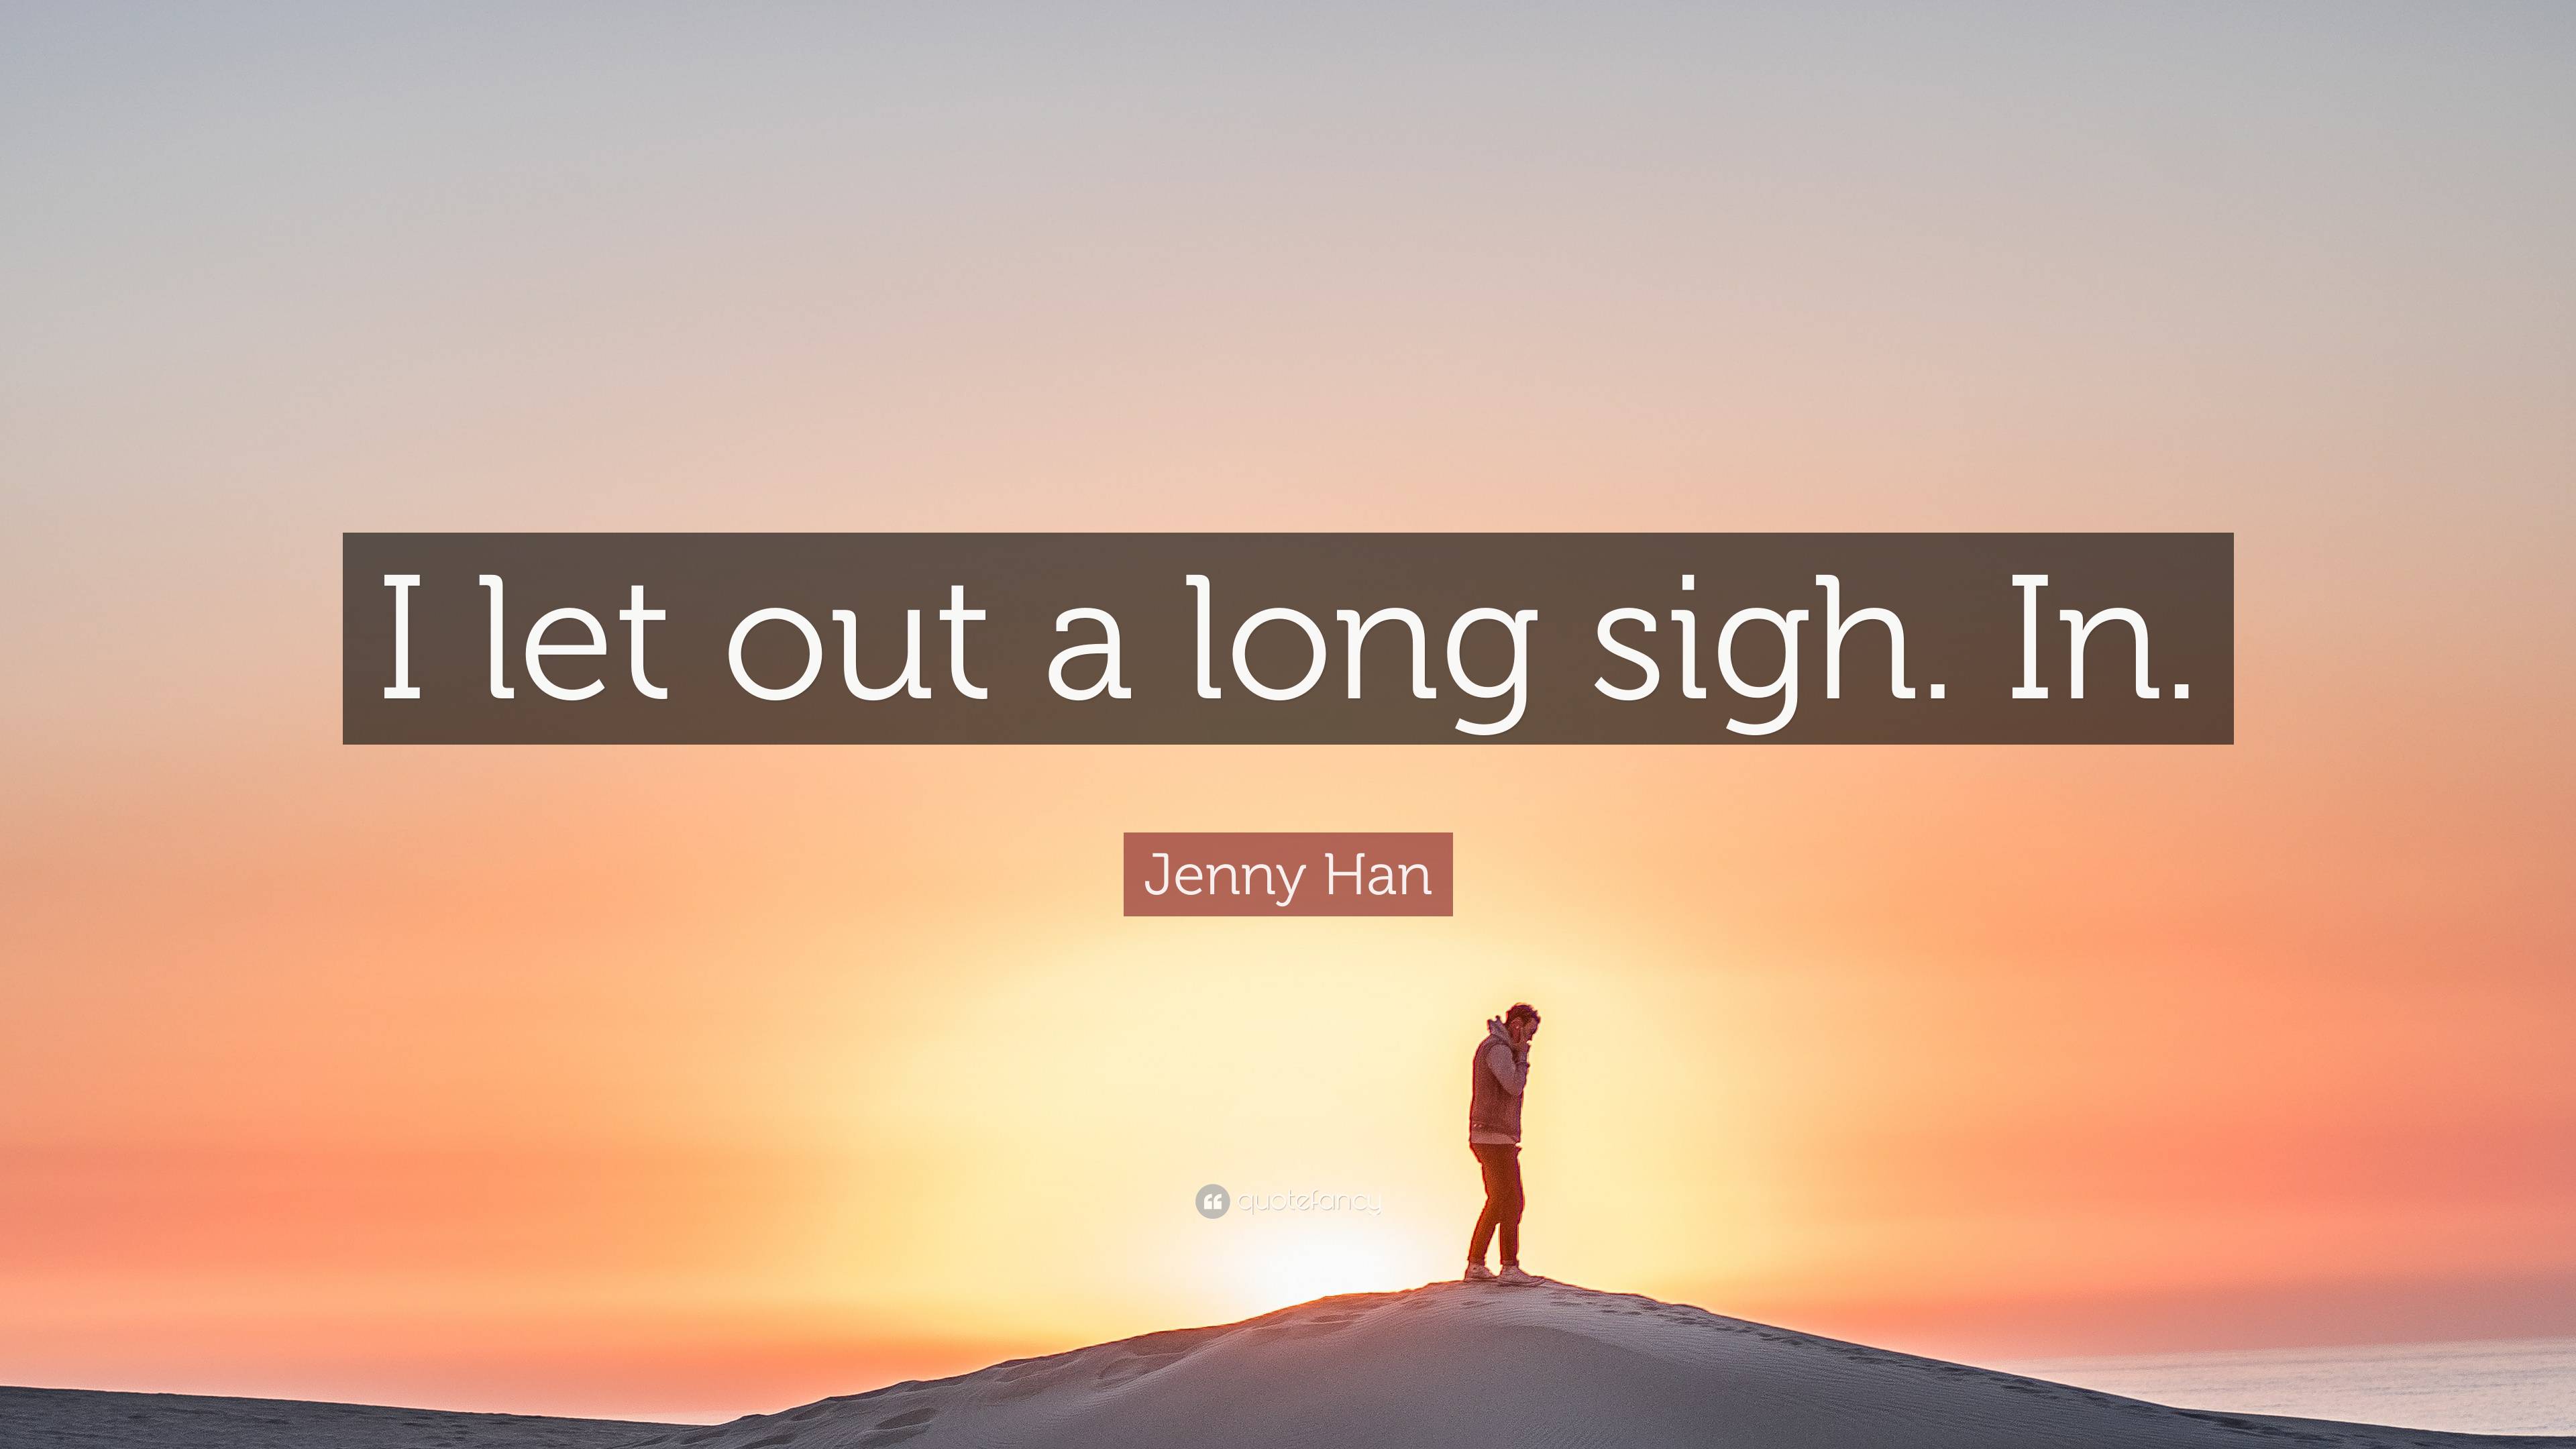 Jenny Han Quote: “I let out a long sigh .quotefancy.com